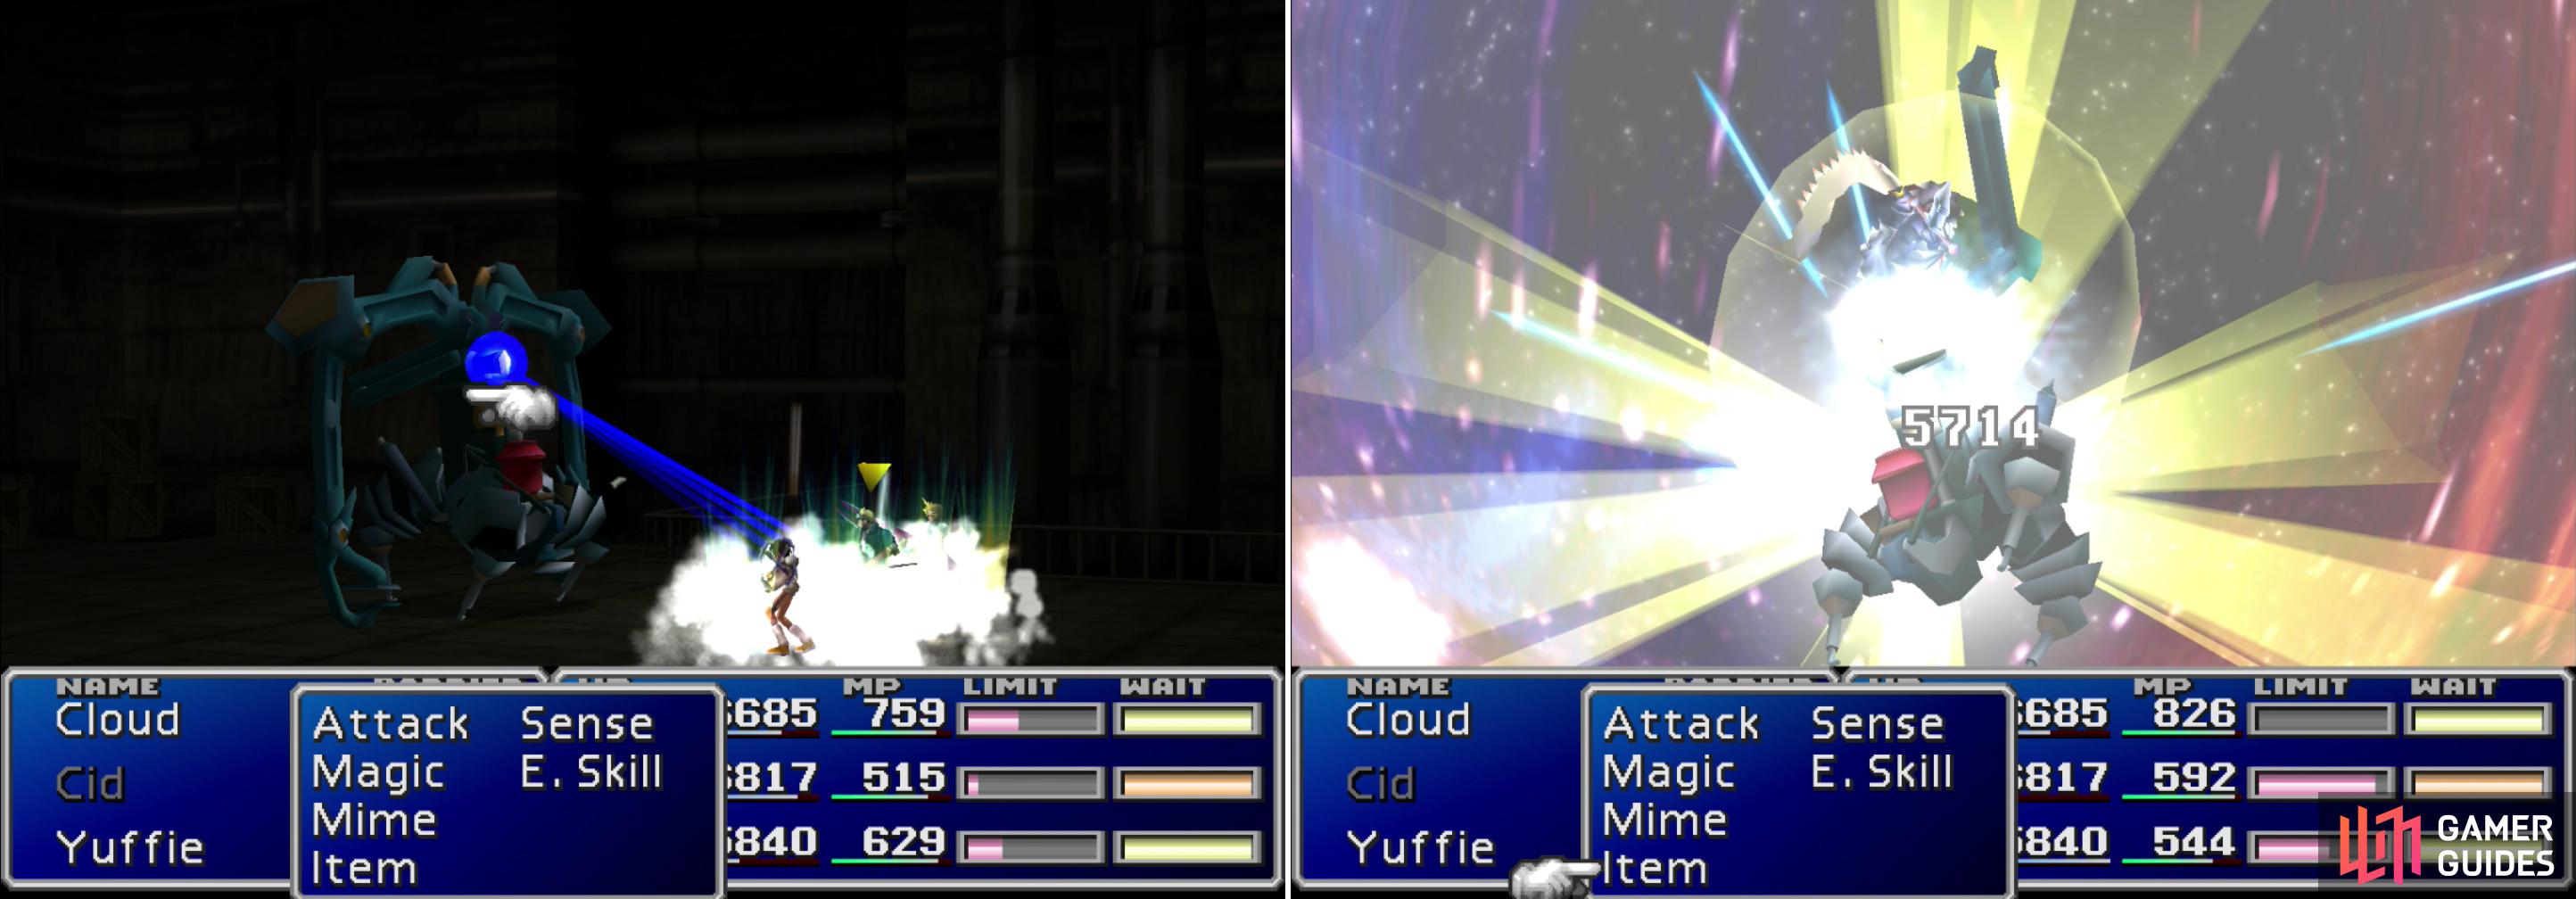 Aside from its arms, Carrry Armor’s “Lapis Laser” is its most powerful attack (left). If you have it, Knights of the Round will end the fight in one casting (right).